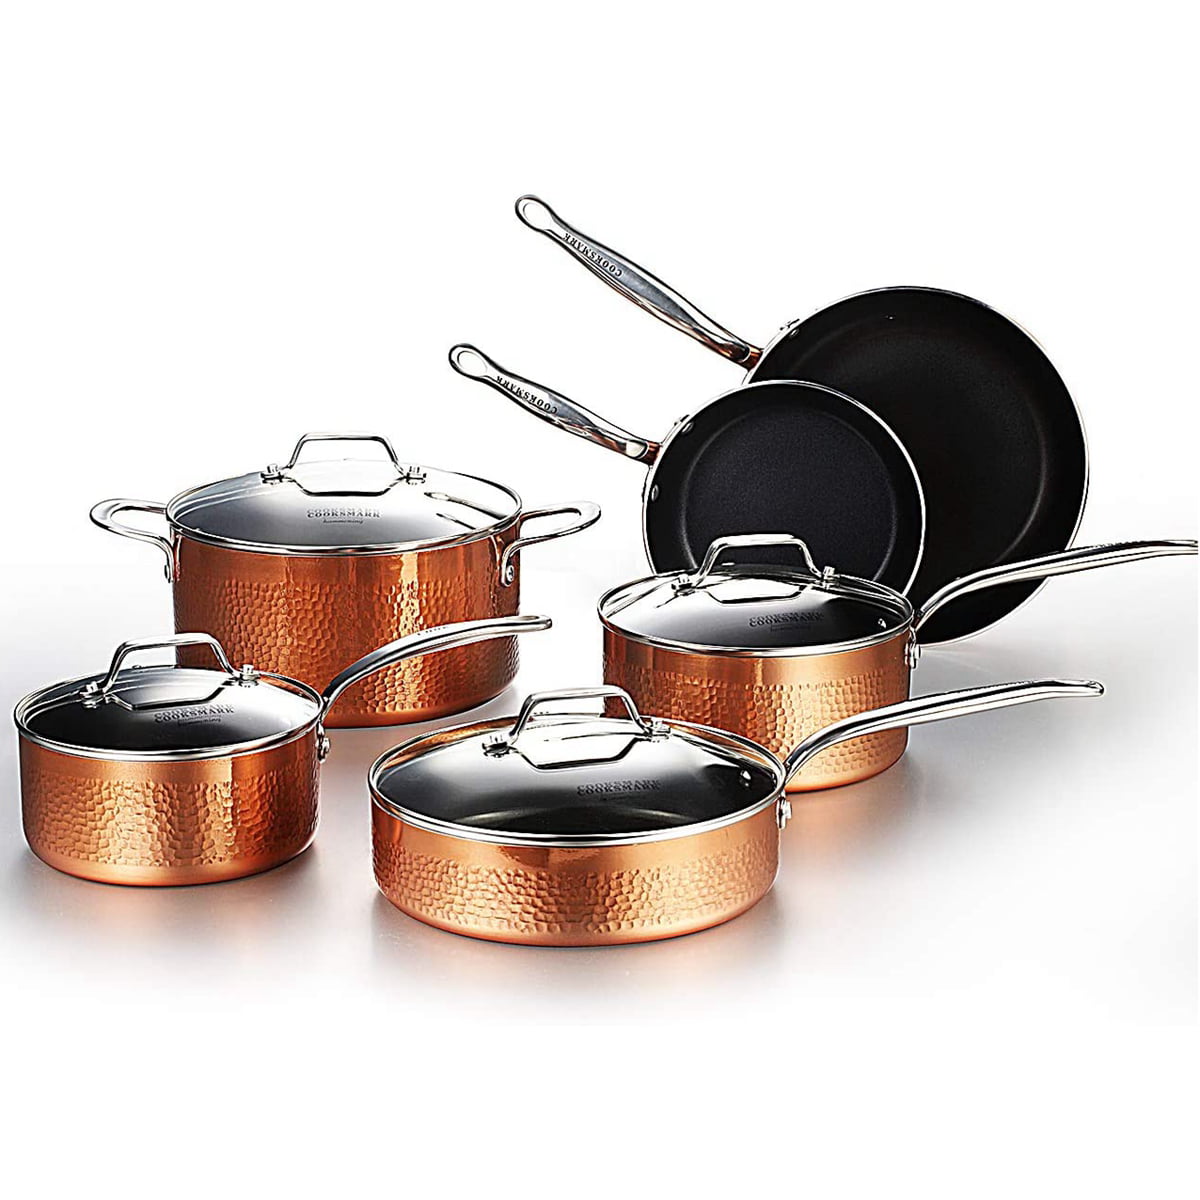 Details about   10pc Hammered Copper Cookware Set with Nonstick Coating Induction Pots & Pan Set 